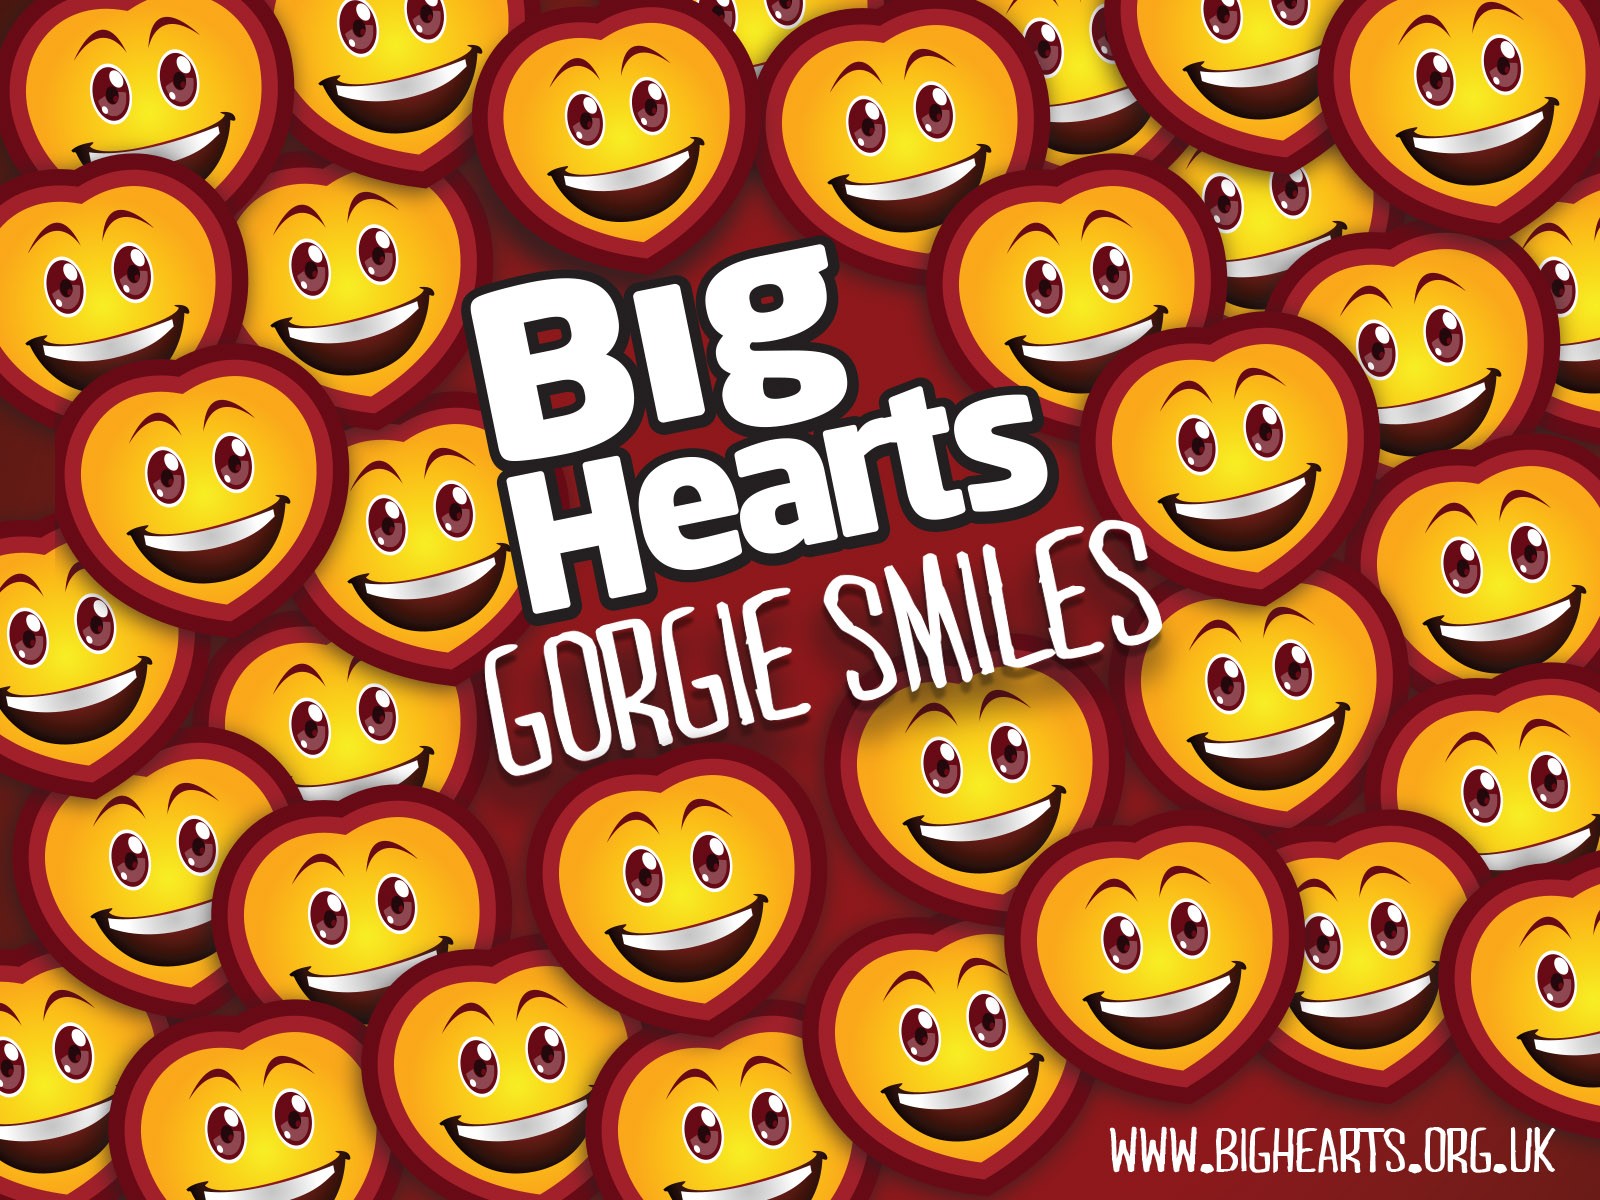  » Join Us and Help Make Gorgie Smile Next Friday